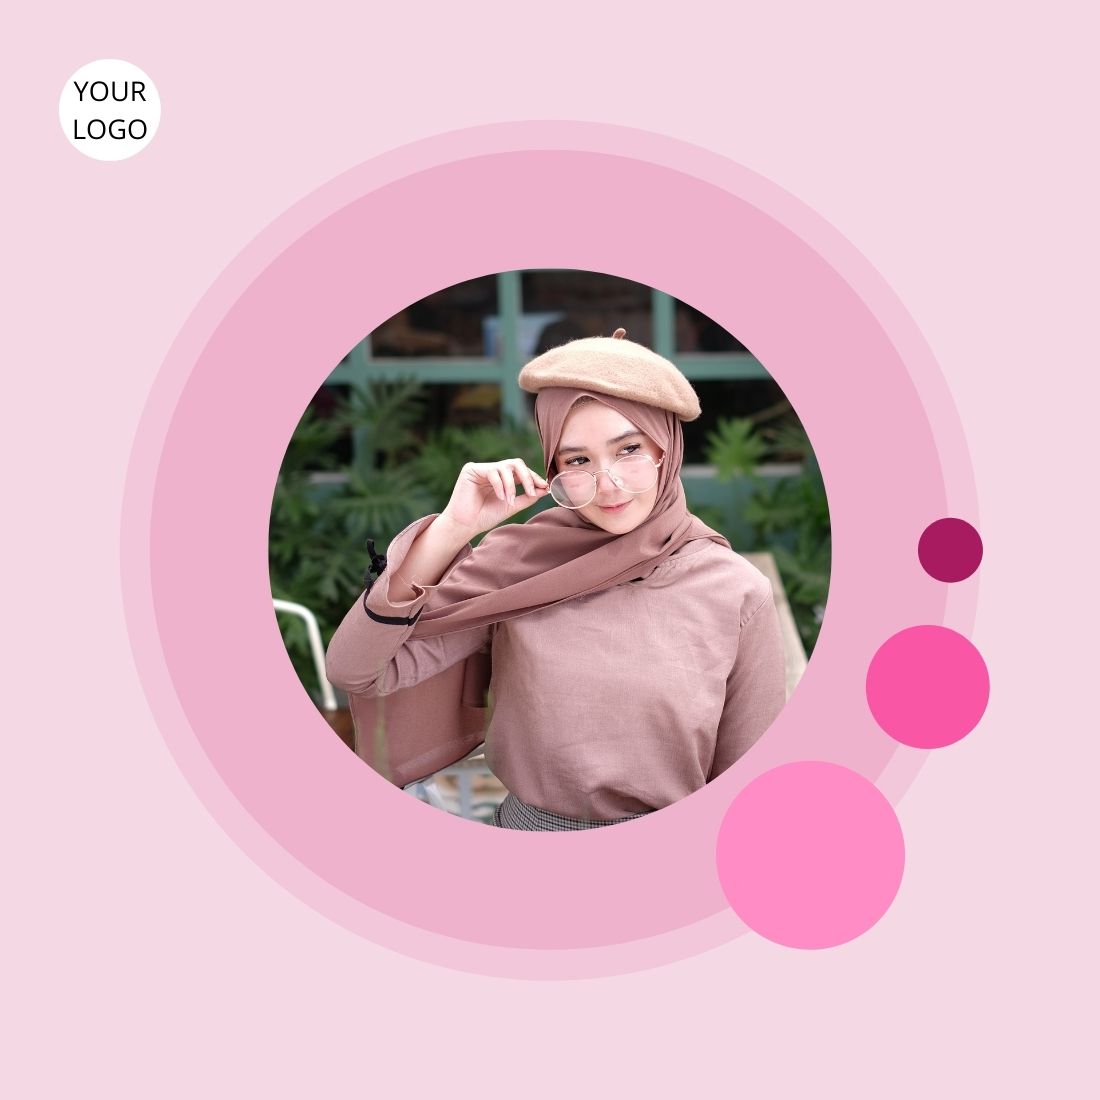 Pink Instagram Feed Canva Templates